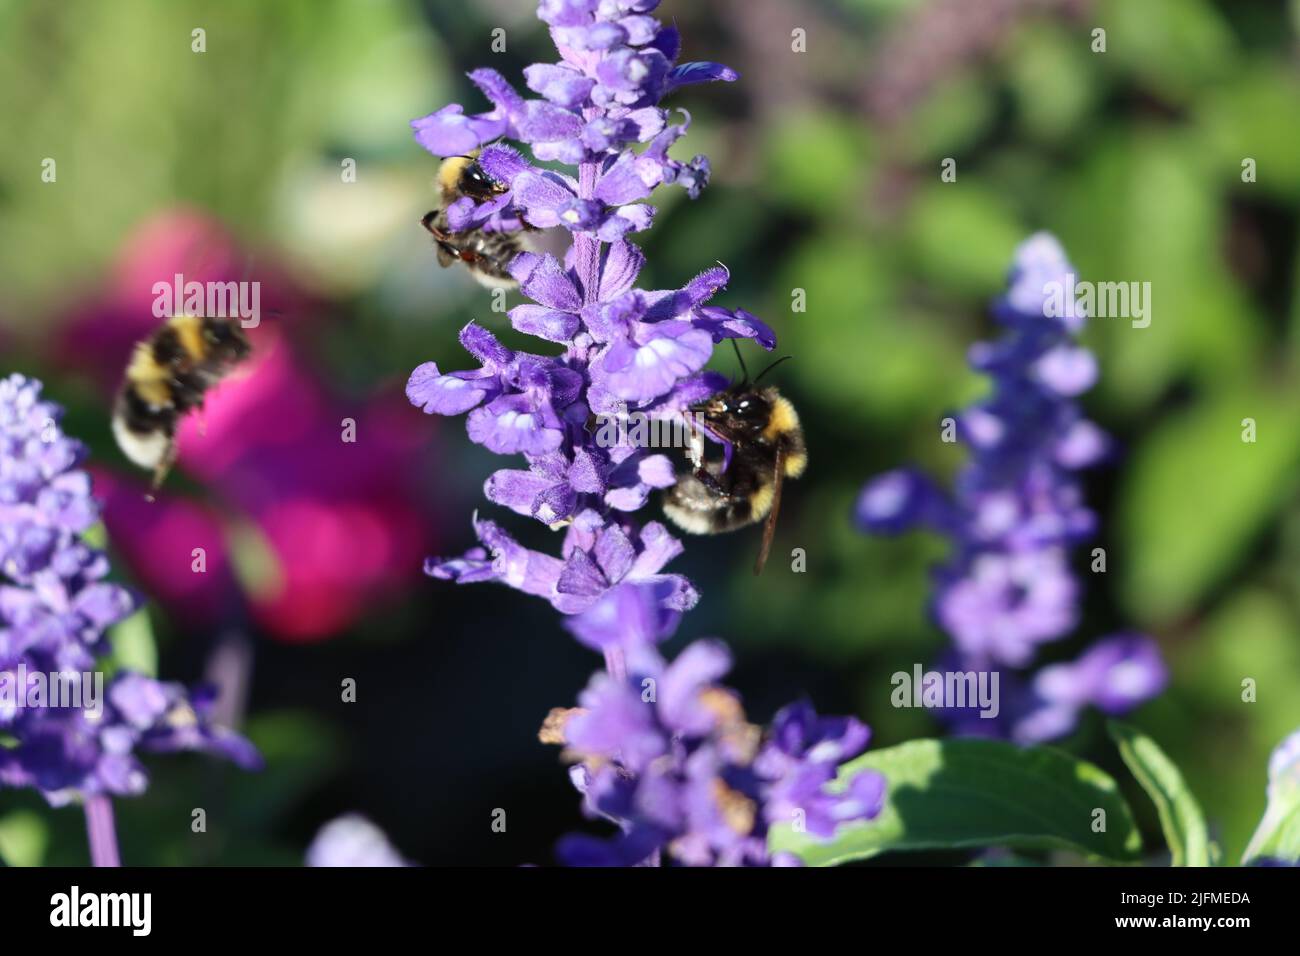 Three bumblebee are flying through lavender field in search for nectar and adventure Stock Photo